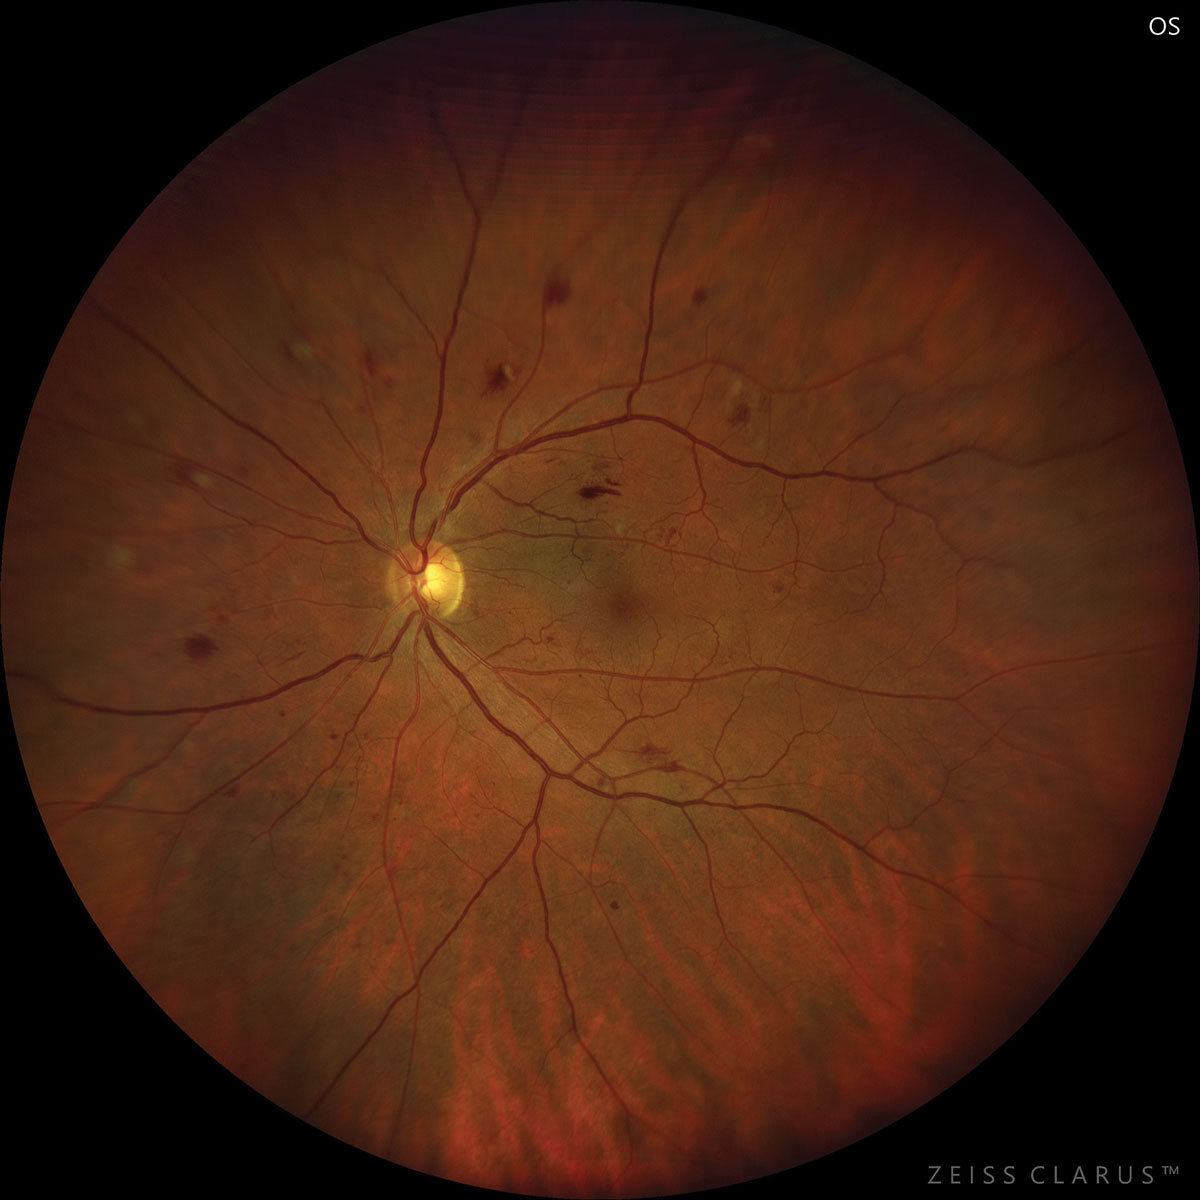 The researchers propose that chronic hyperglycemia in diabetes patients leads to the atrophy of choroidal arterioles, causing choroidal thinning.